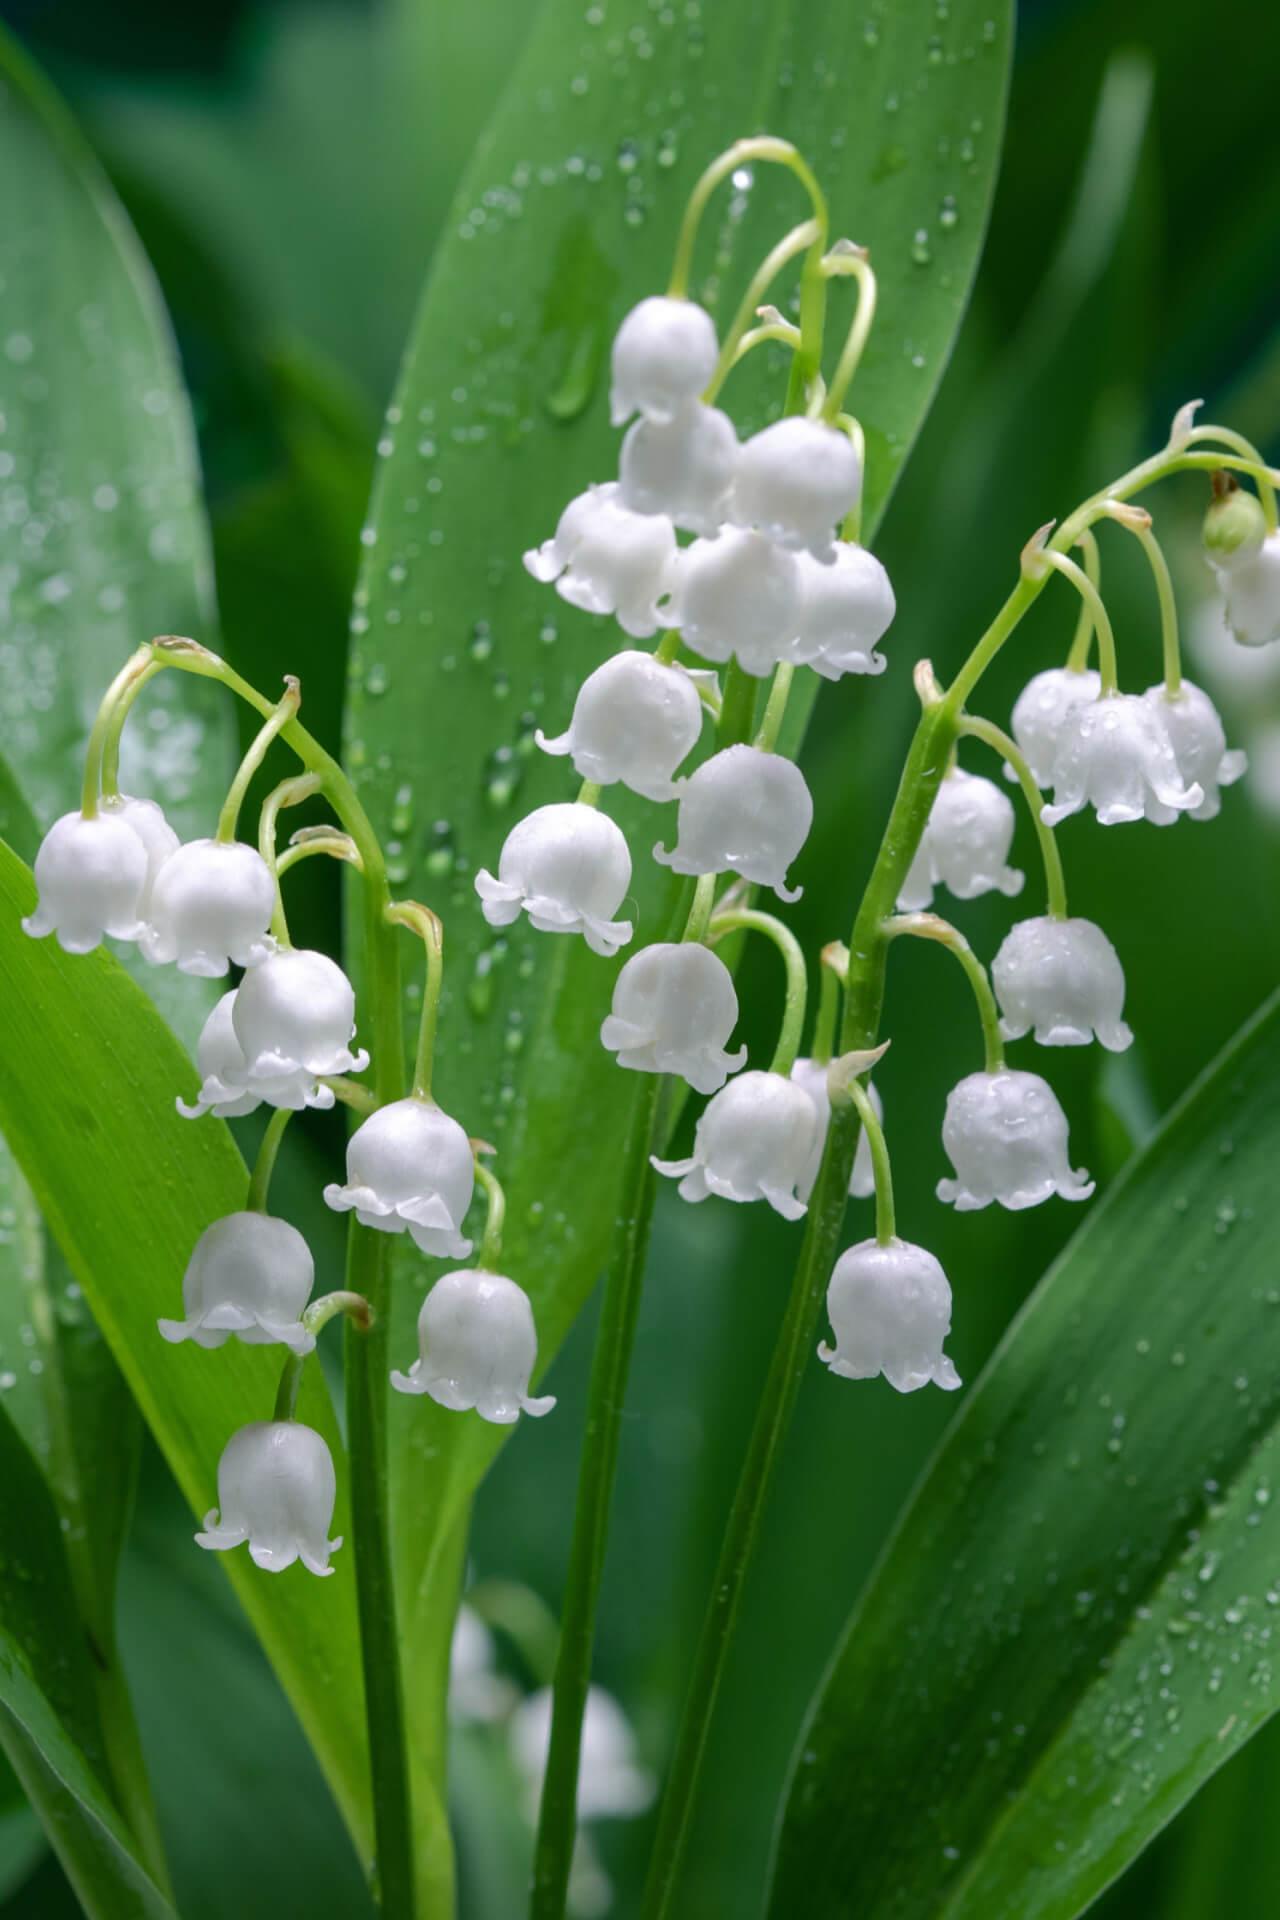 Buy Lily Of The Valley Plants For Sale